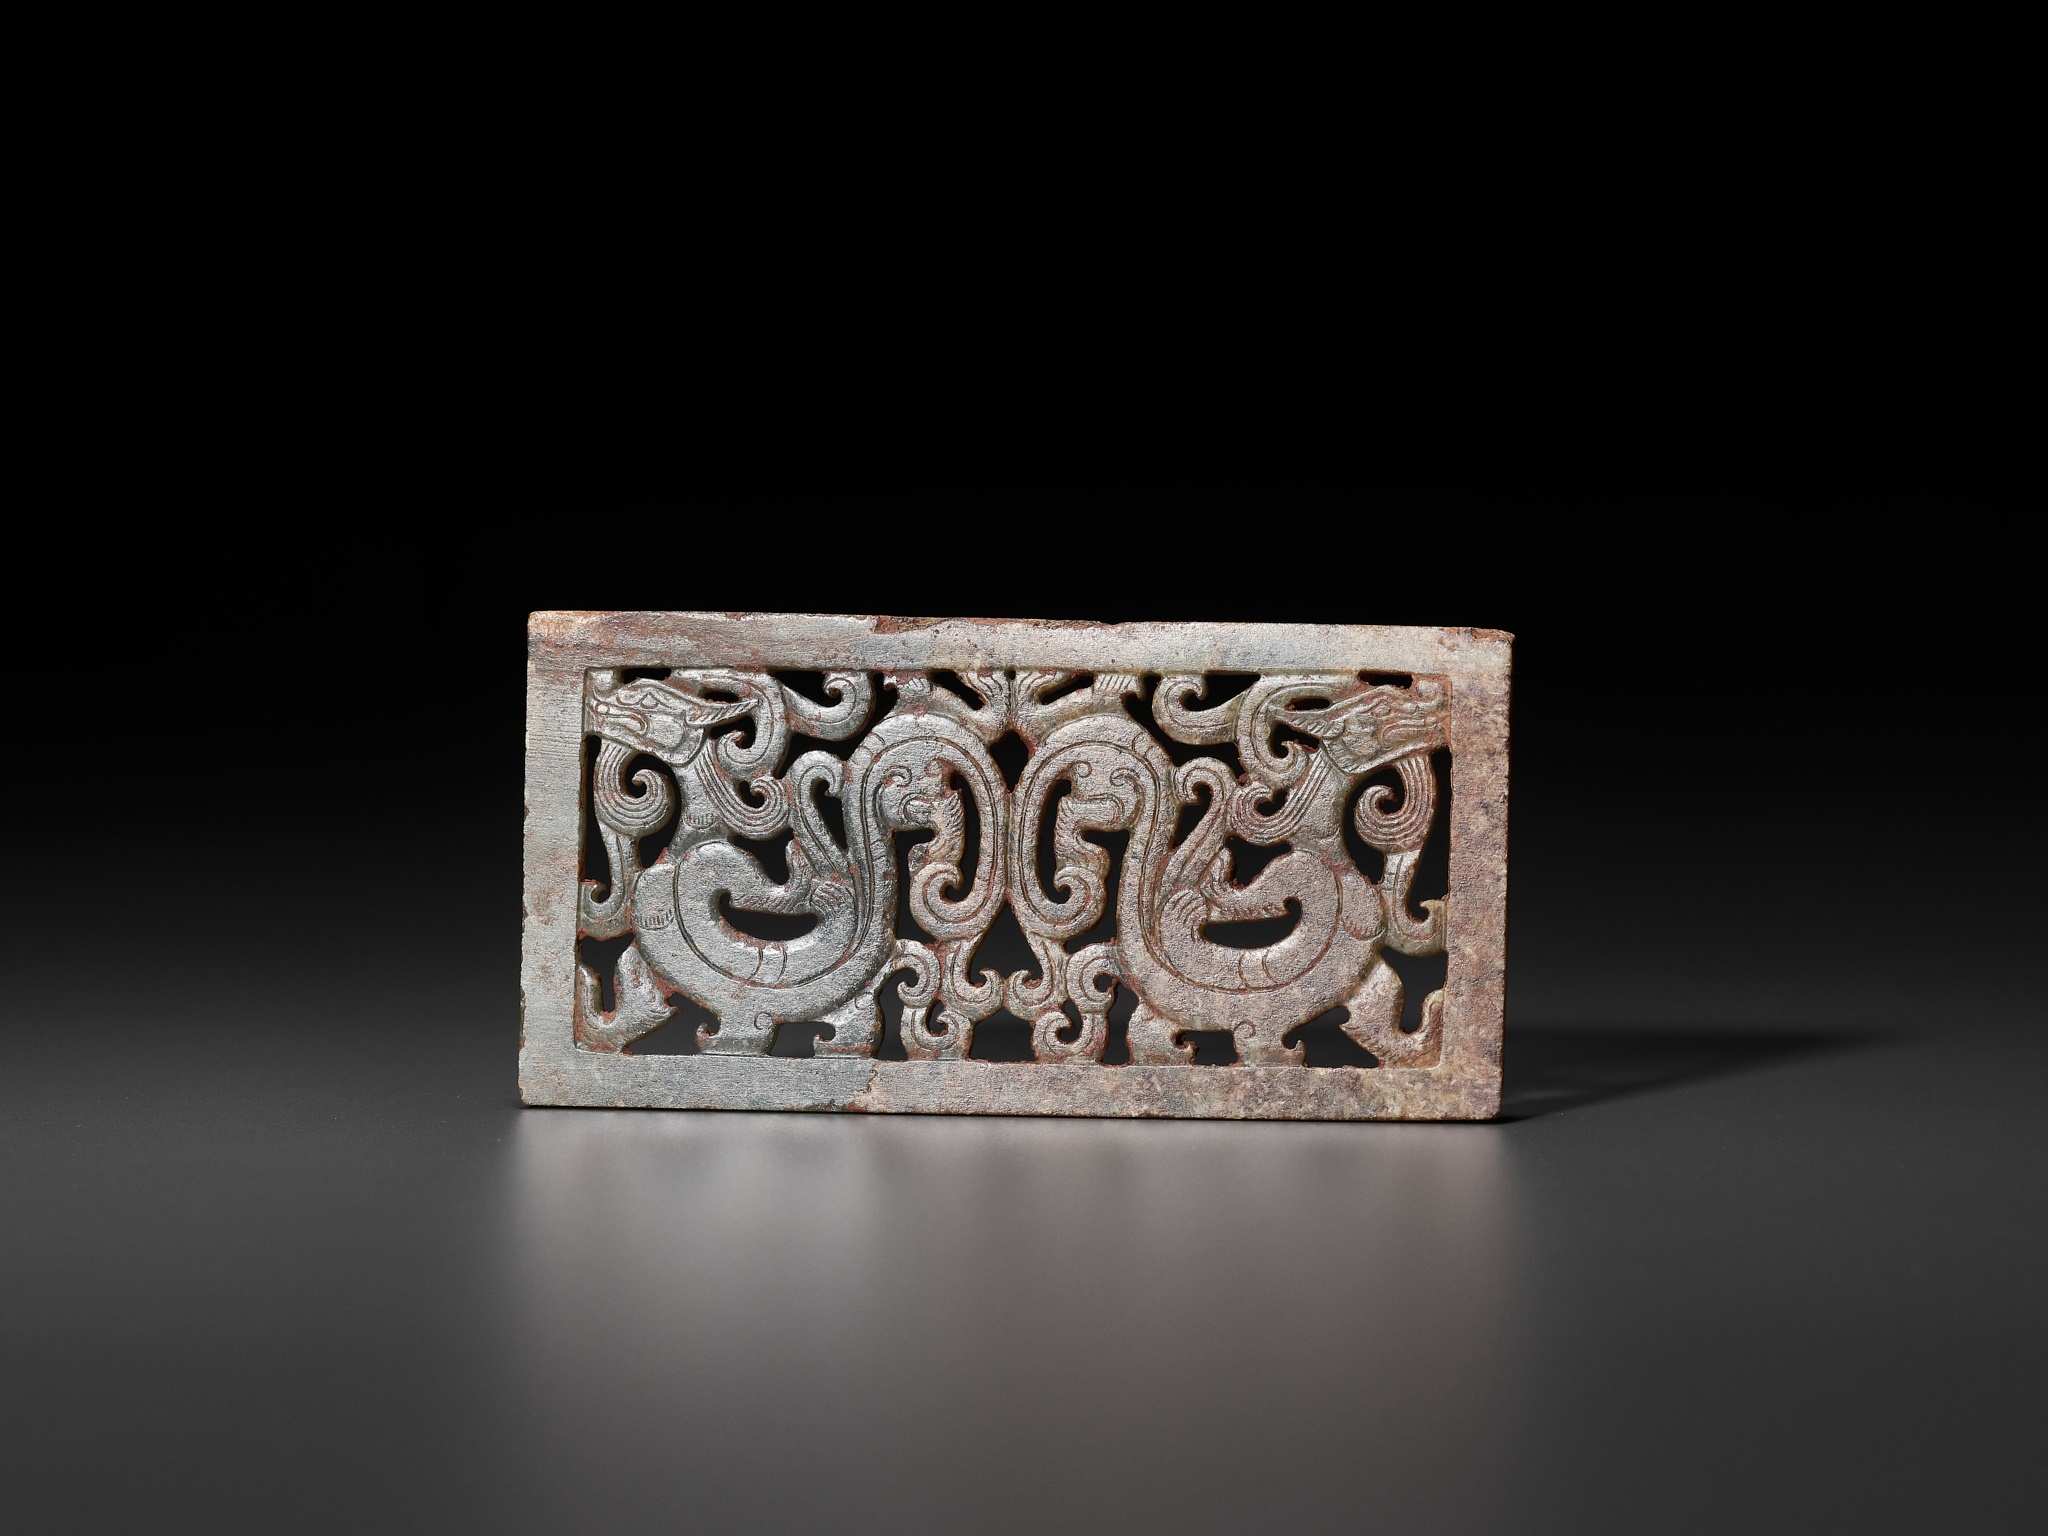 A RECTANGULAR GREEN JADE 'DOUBLE DRAGON' PLAQUE, LATE WARRING STATES PERIOD TO EARLY WESTERN HAN DYN - Image 11 of 12